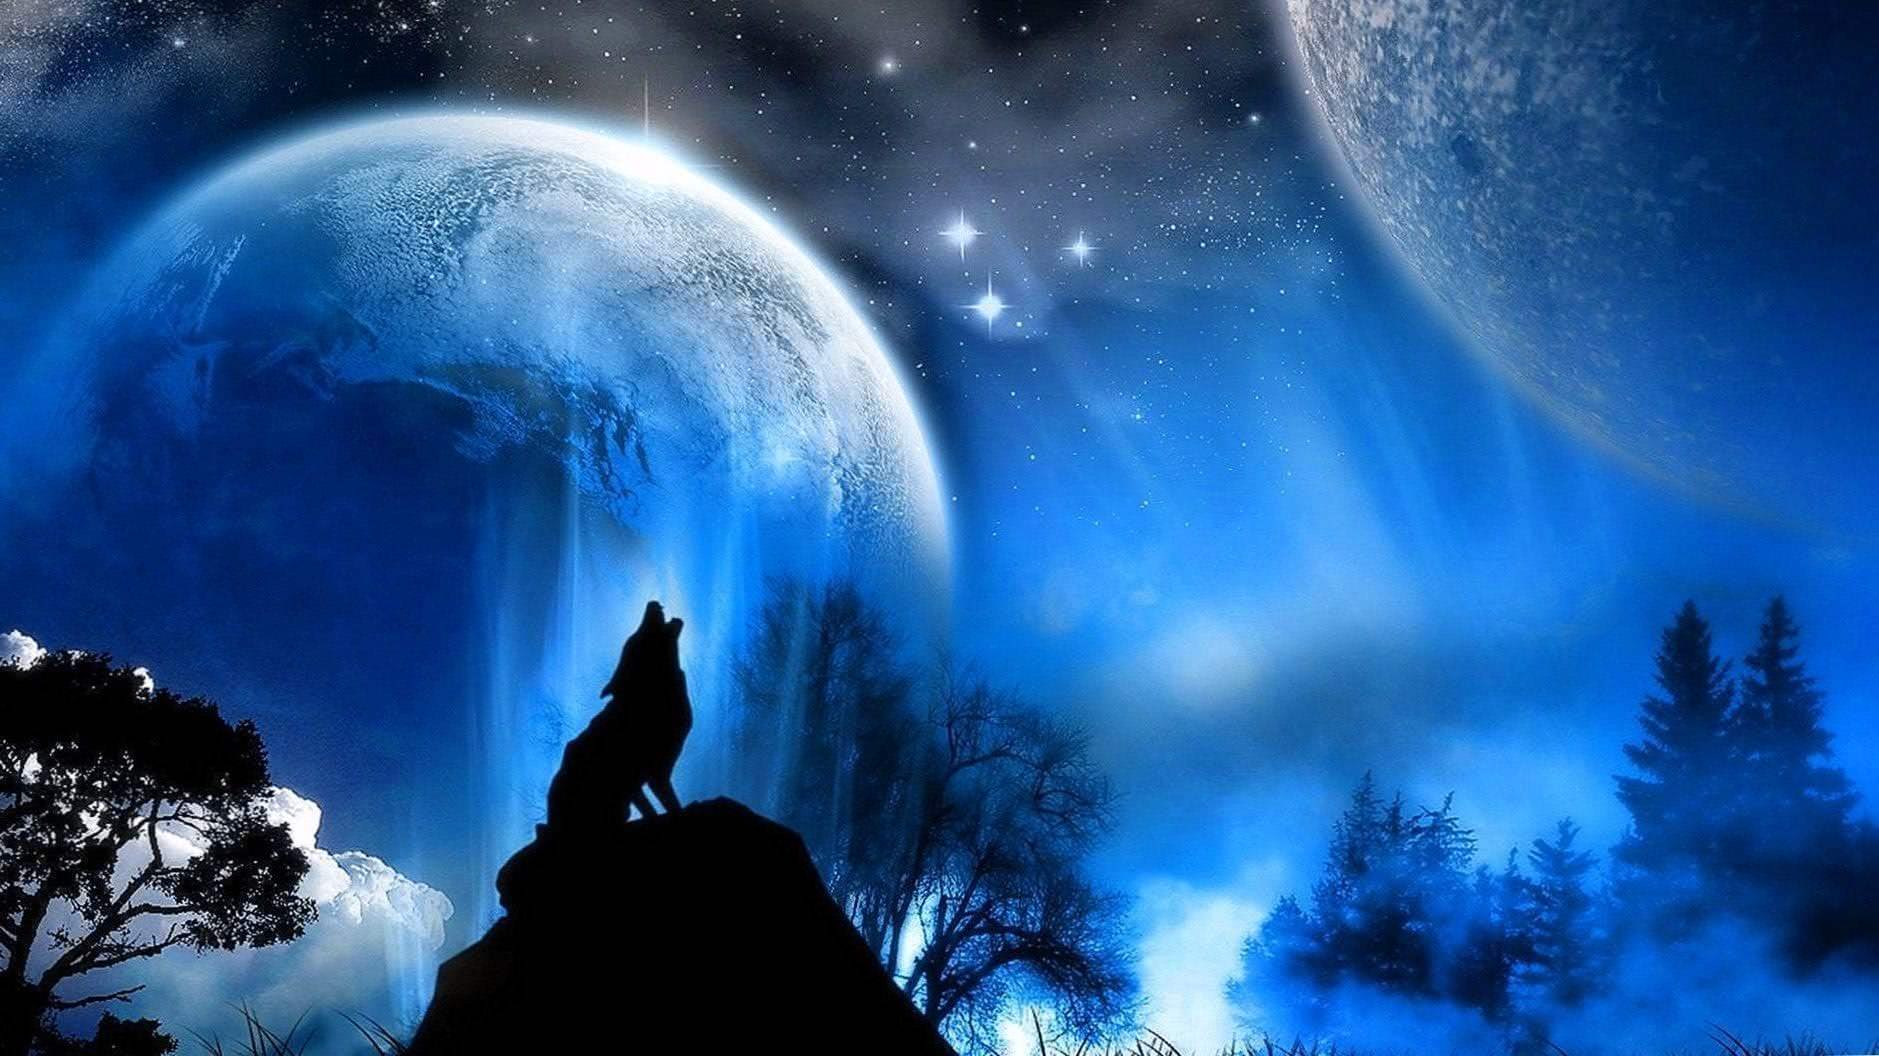 Wallpapers Wolf Full HD